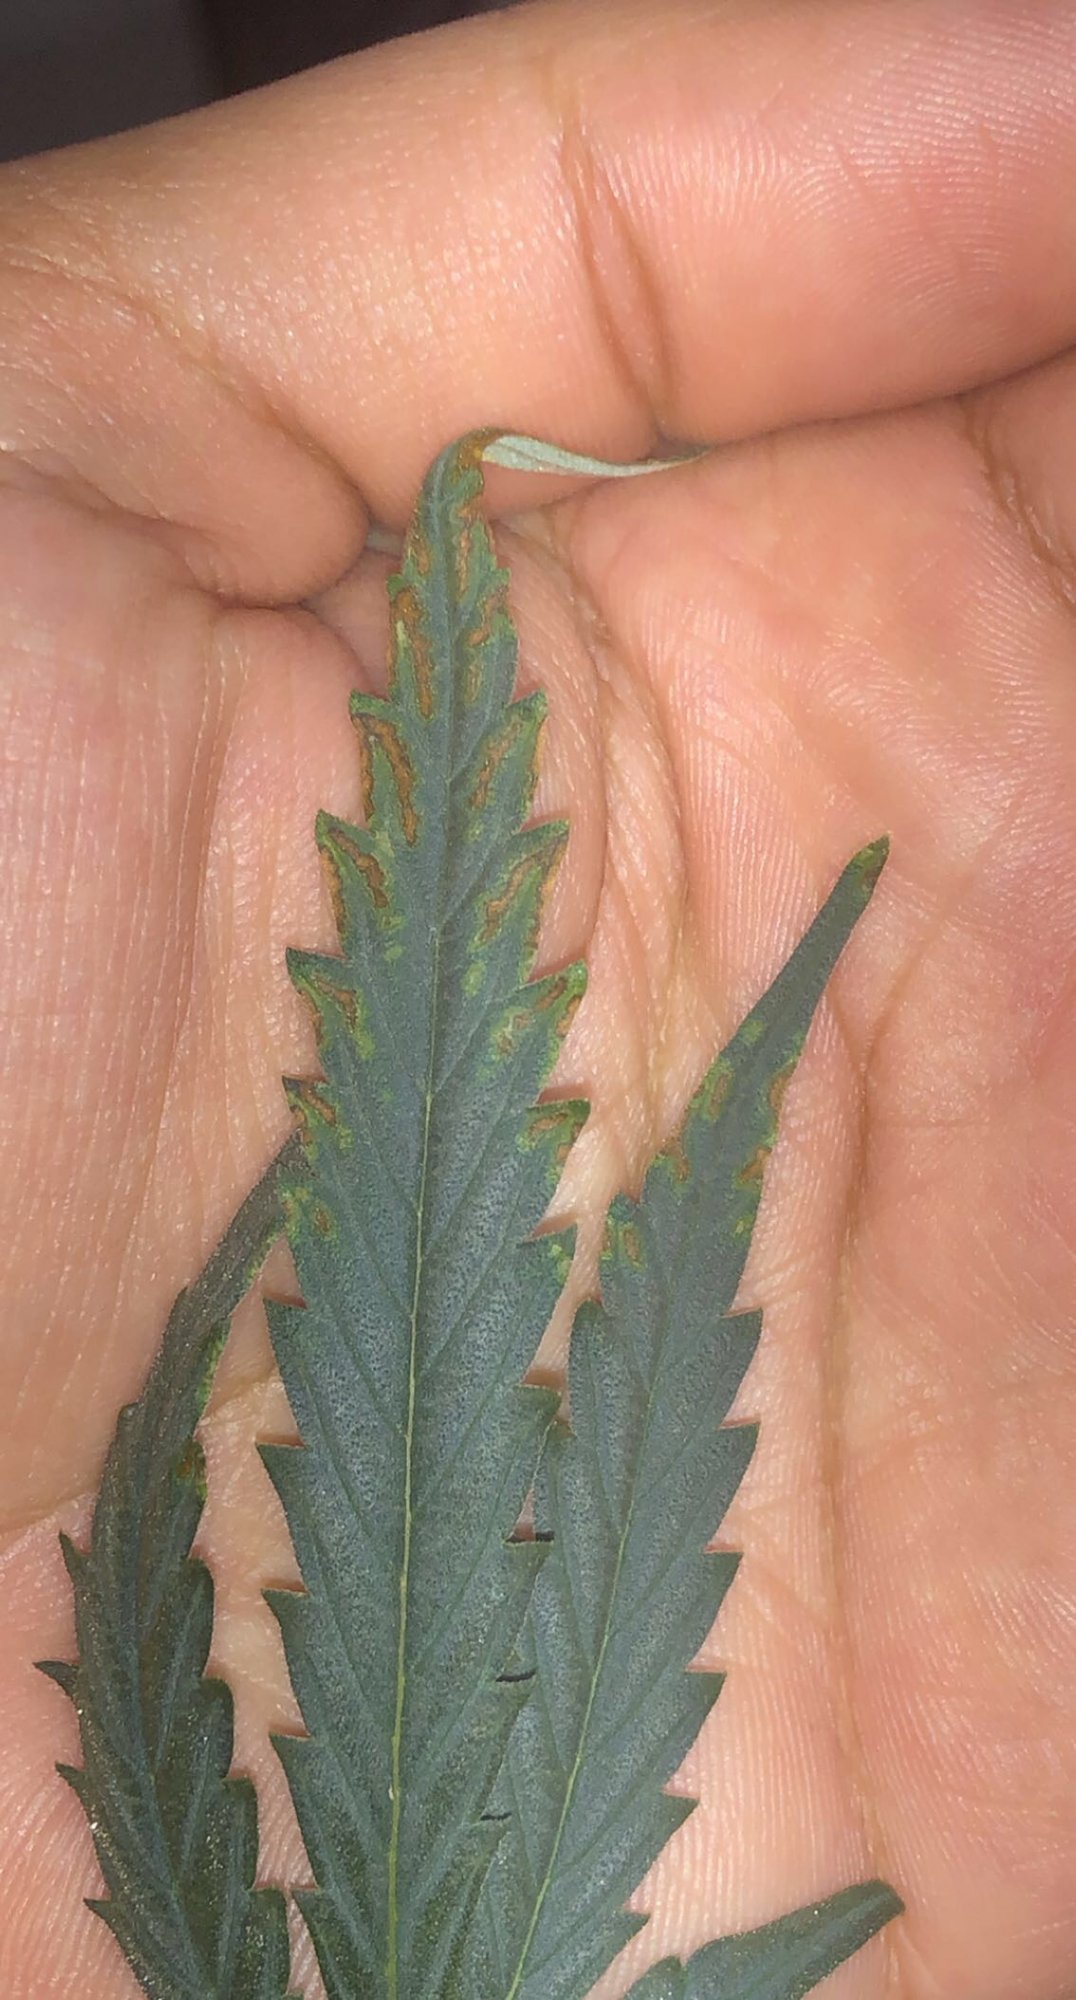 Is this a calcium deficiency